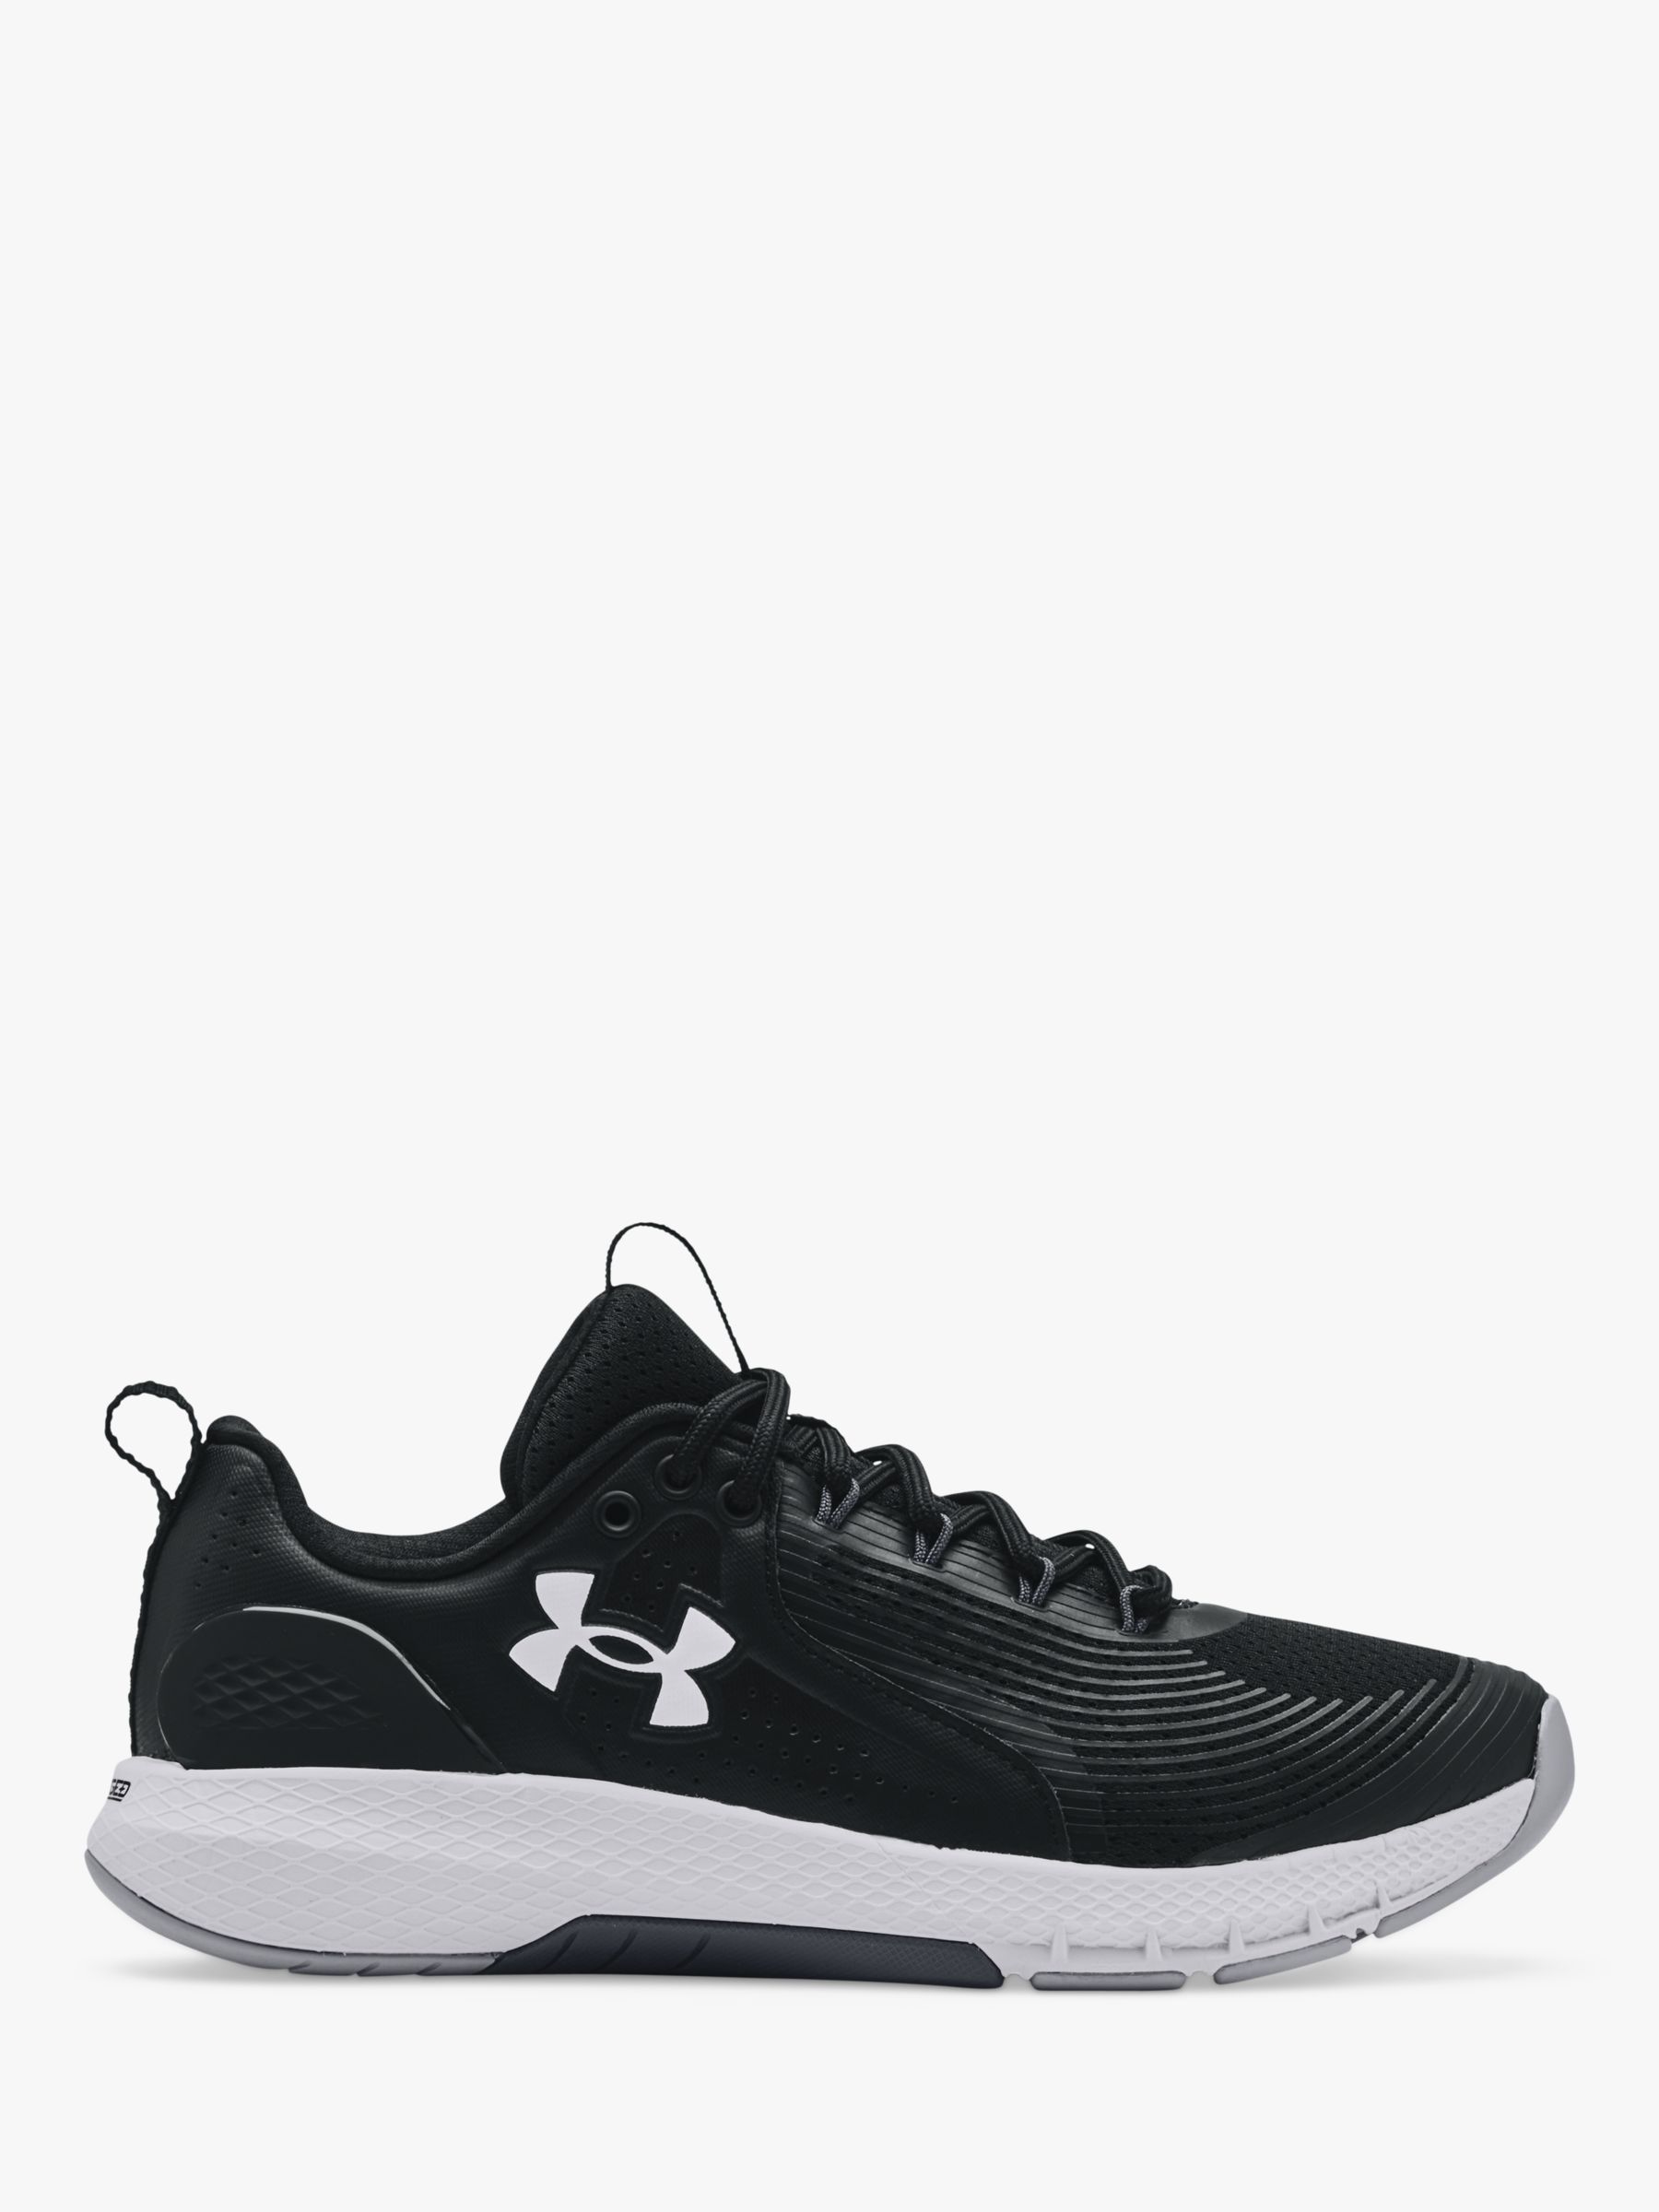 Under Armour Charged Commit TR 3 Men's Cross Trainers